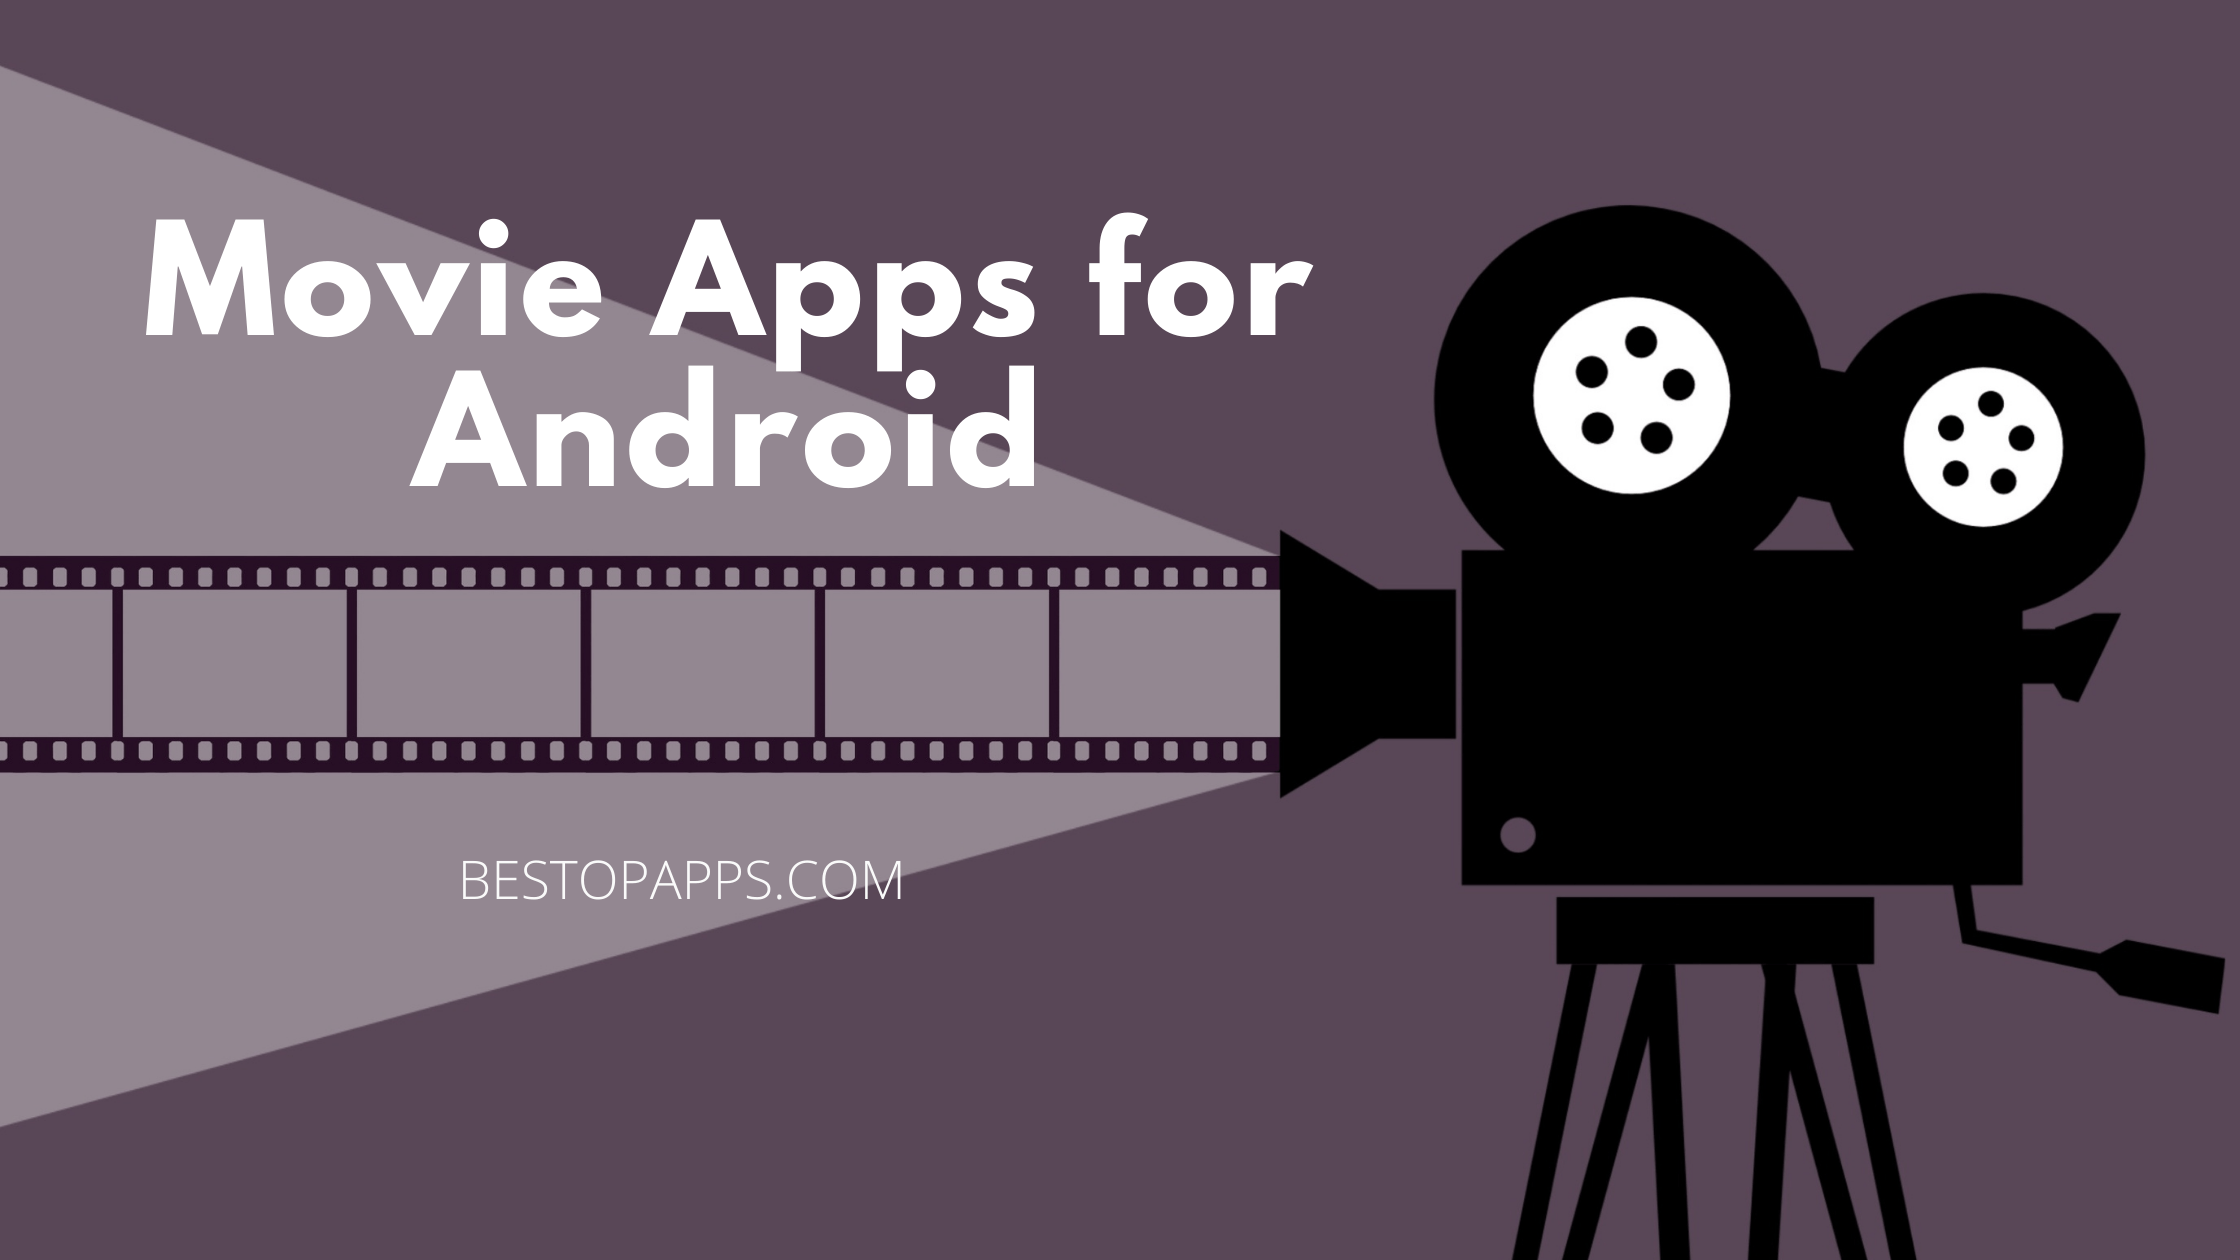 Movie Apps for Android